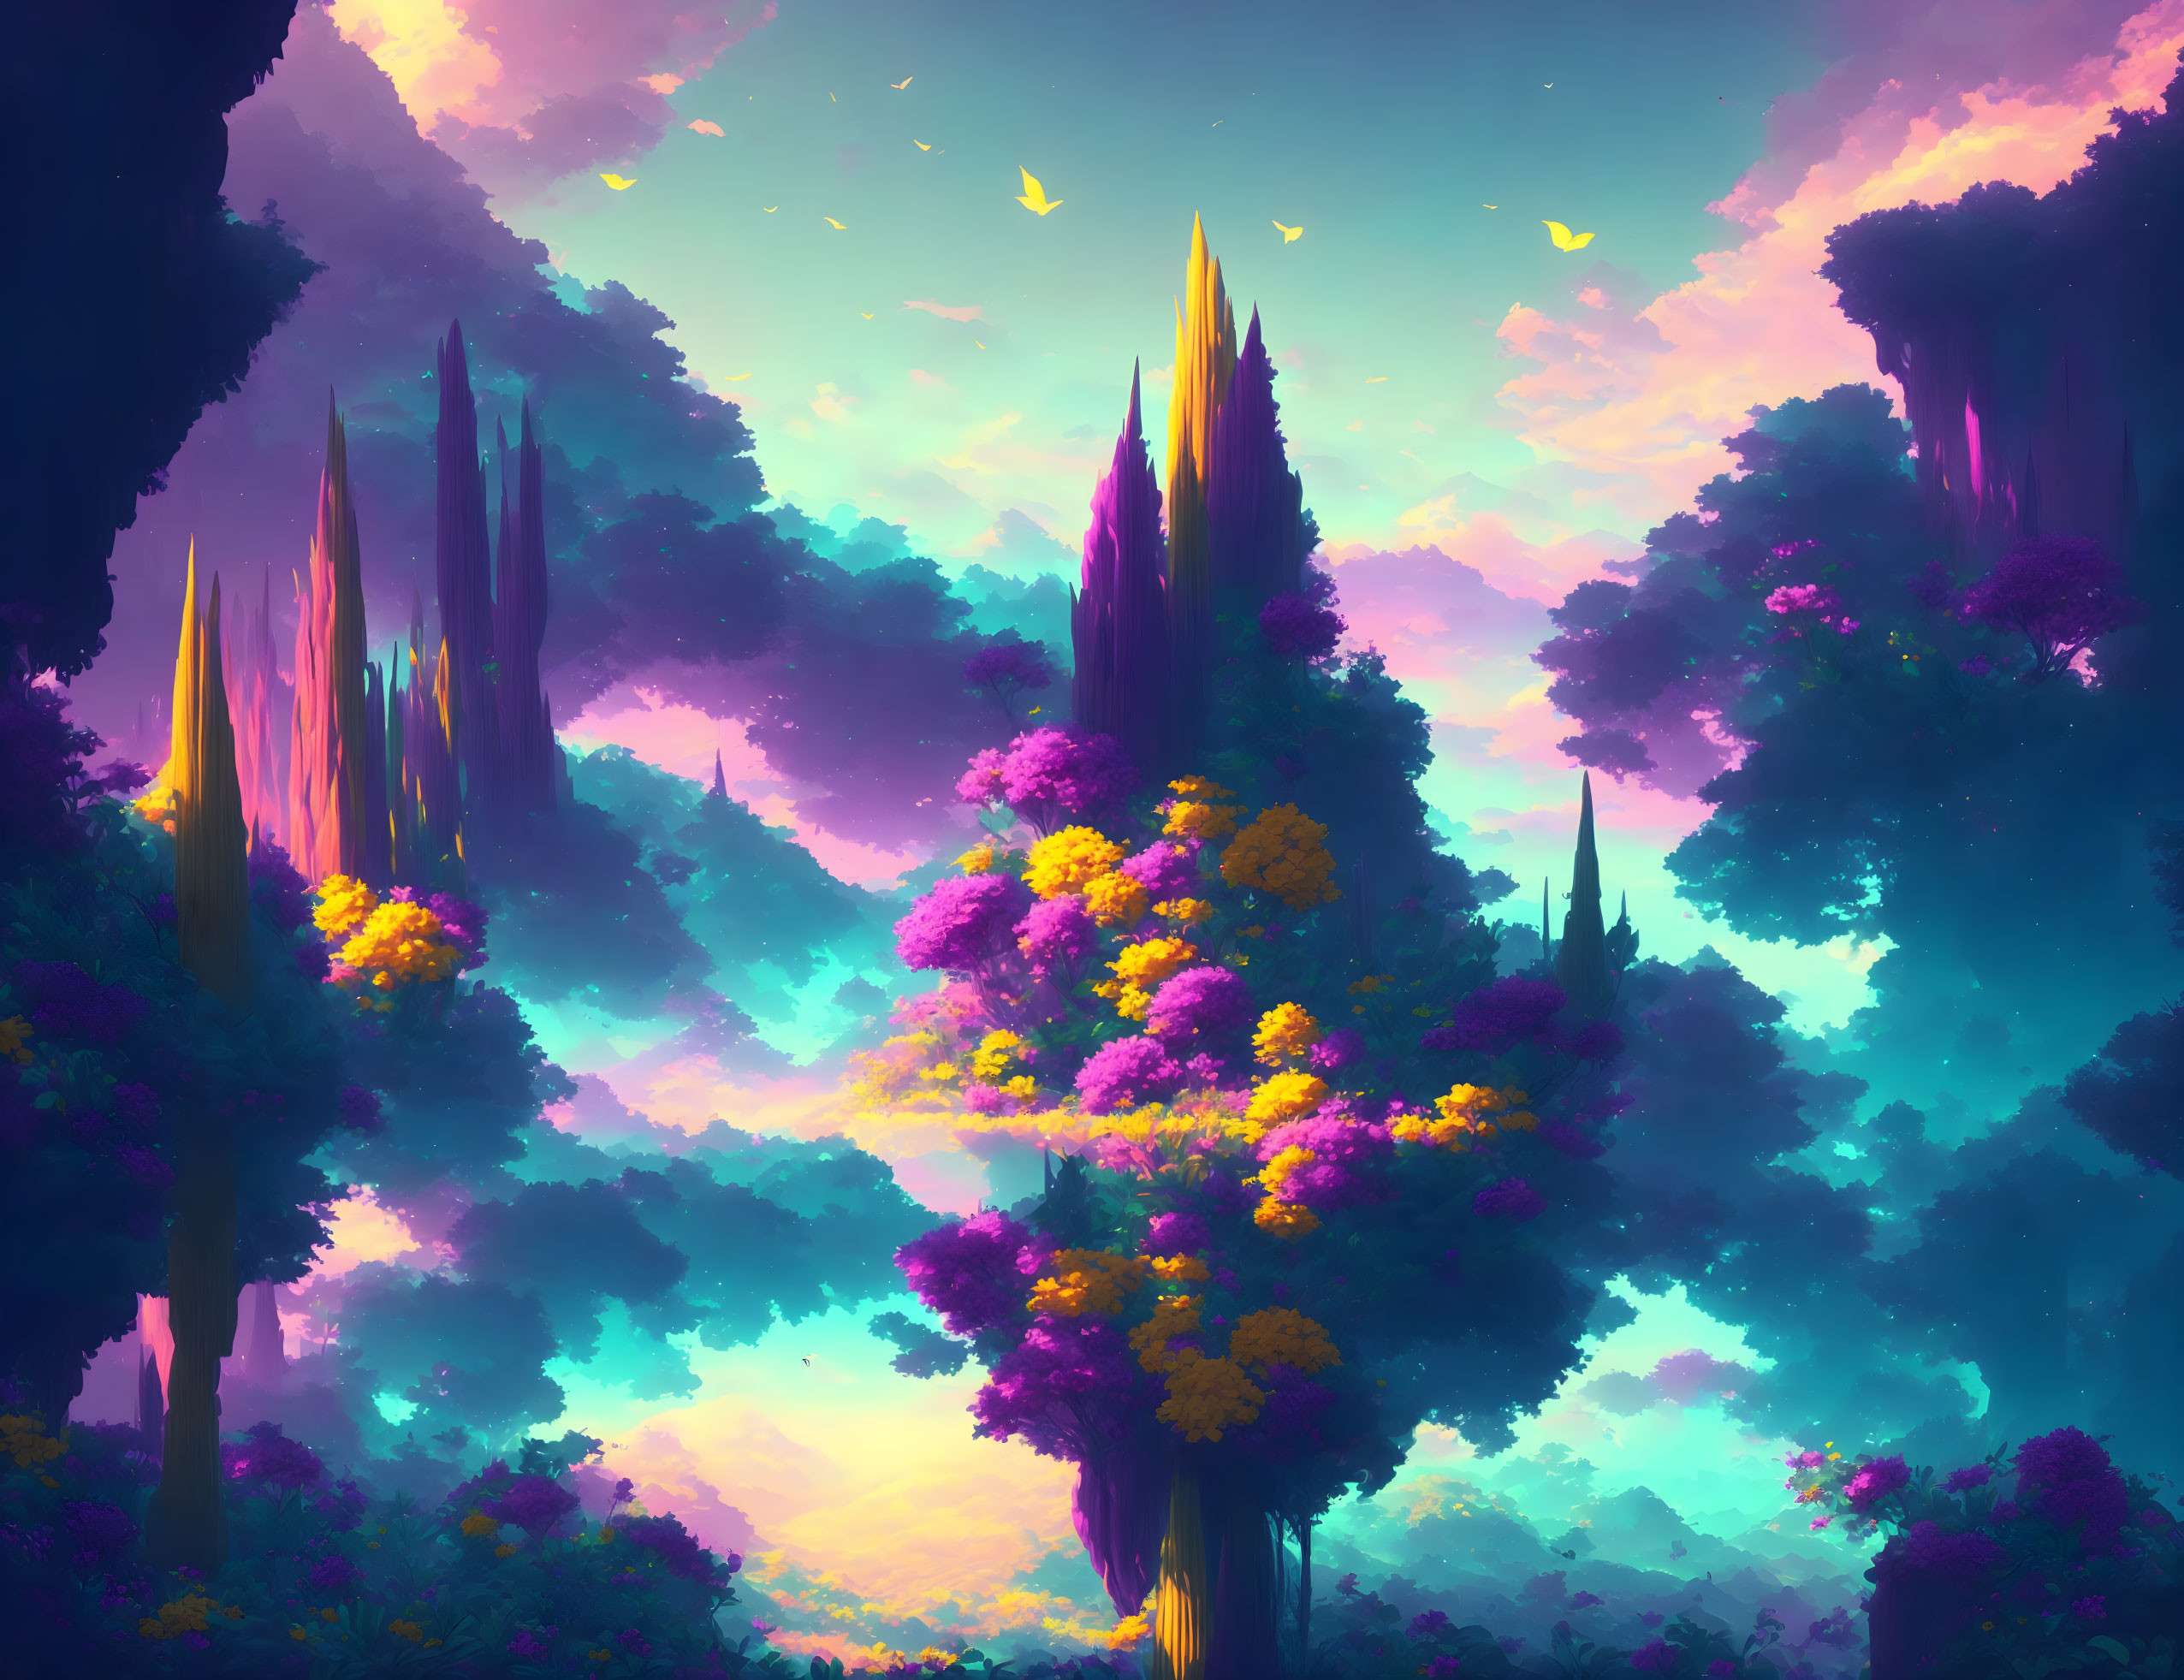 Majestic fantasy forest with vibrant colors under dreamy sky